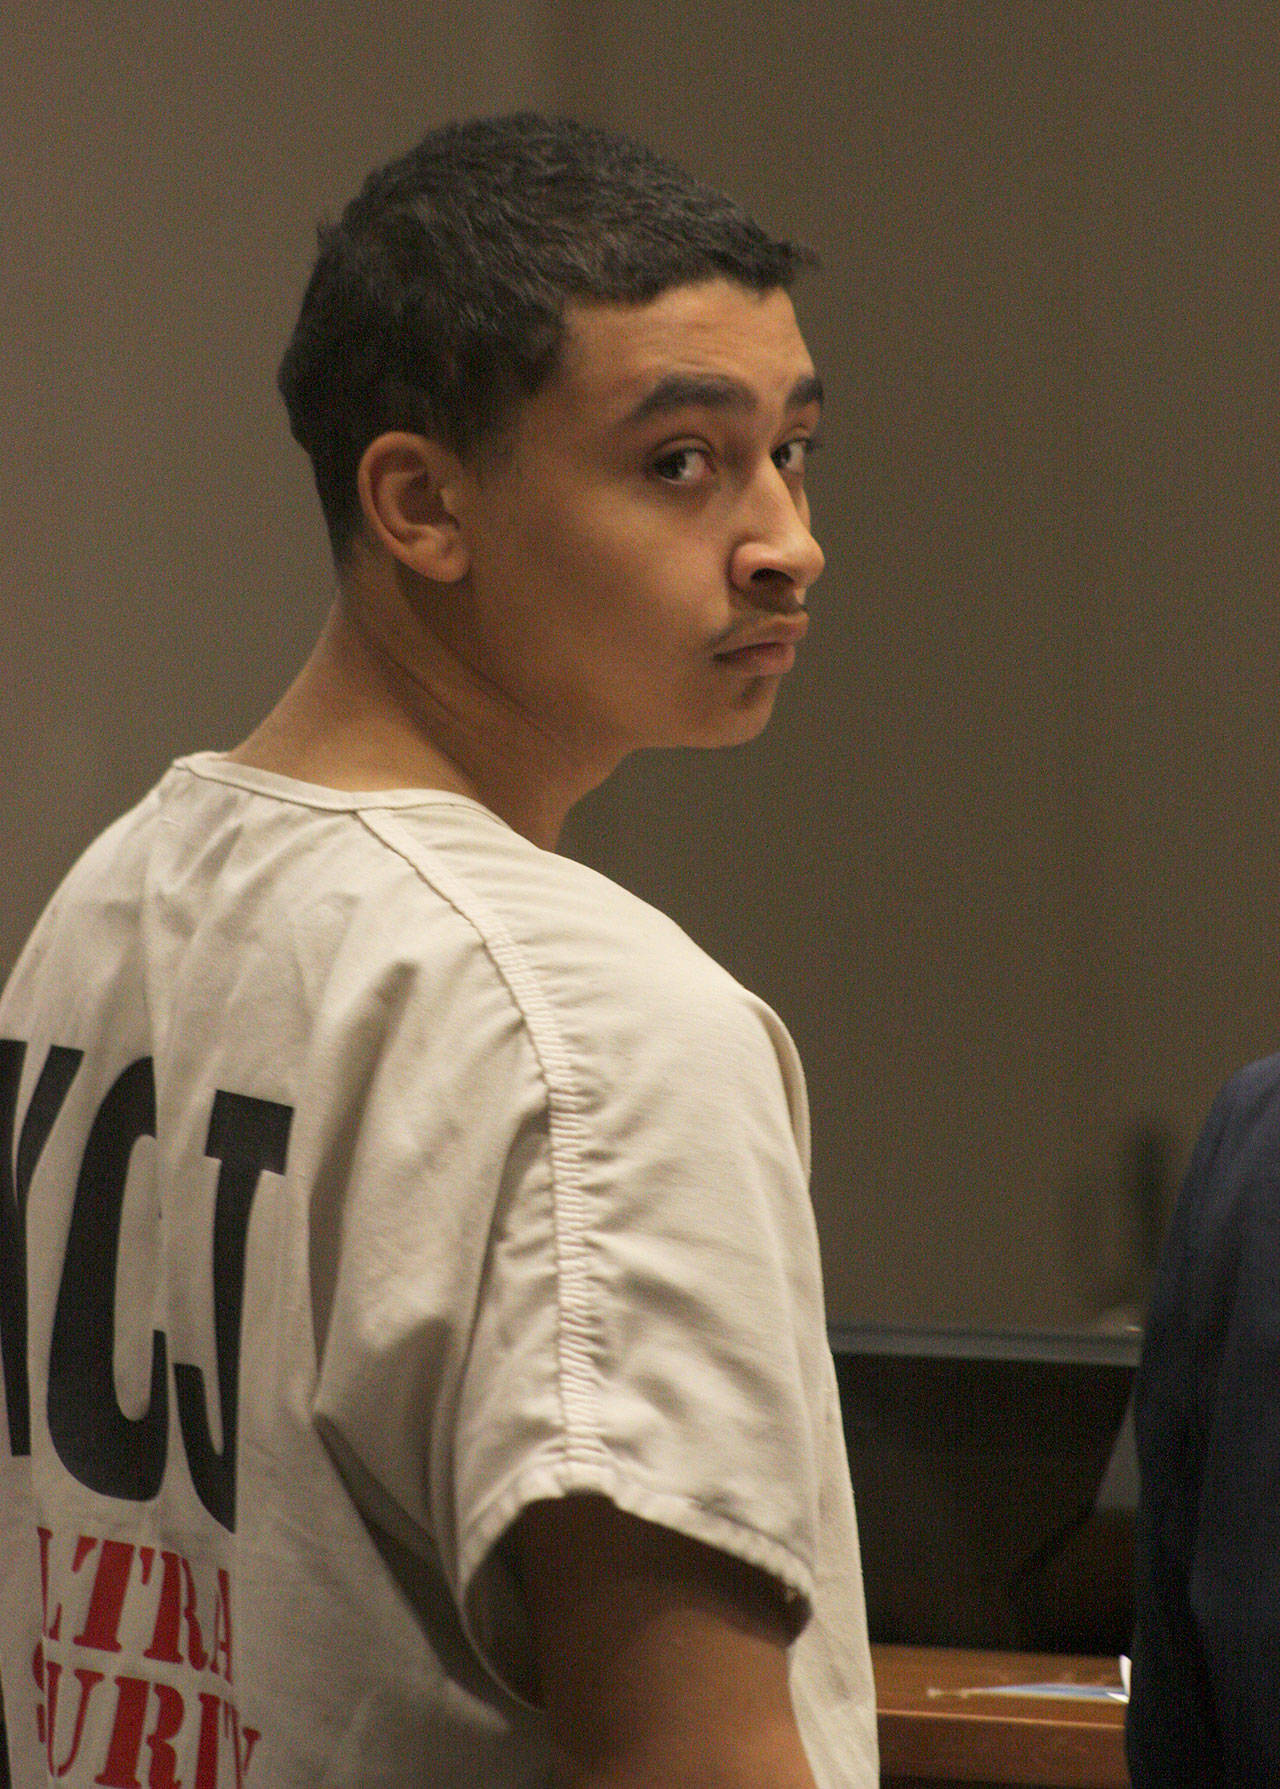 Giovanni D. Herrin glances back during his arraignment in King County Superior Court at the Maleng Regional Justice Center on Tuesday. Herrin pleaded not to a first-degree murder charge and to a second-degree escape charge. MARK KLAAS, Kent Reporter